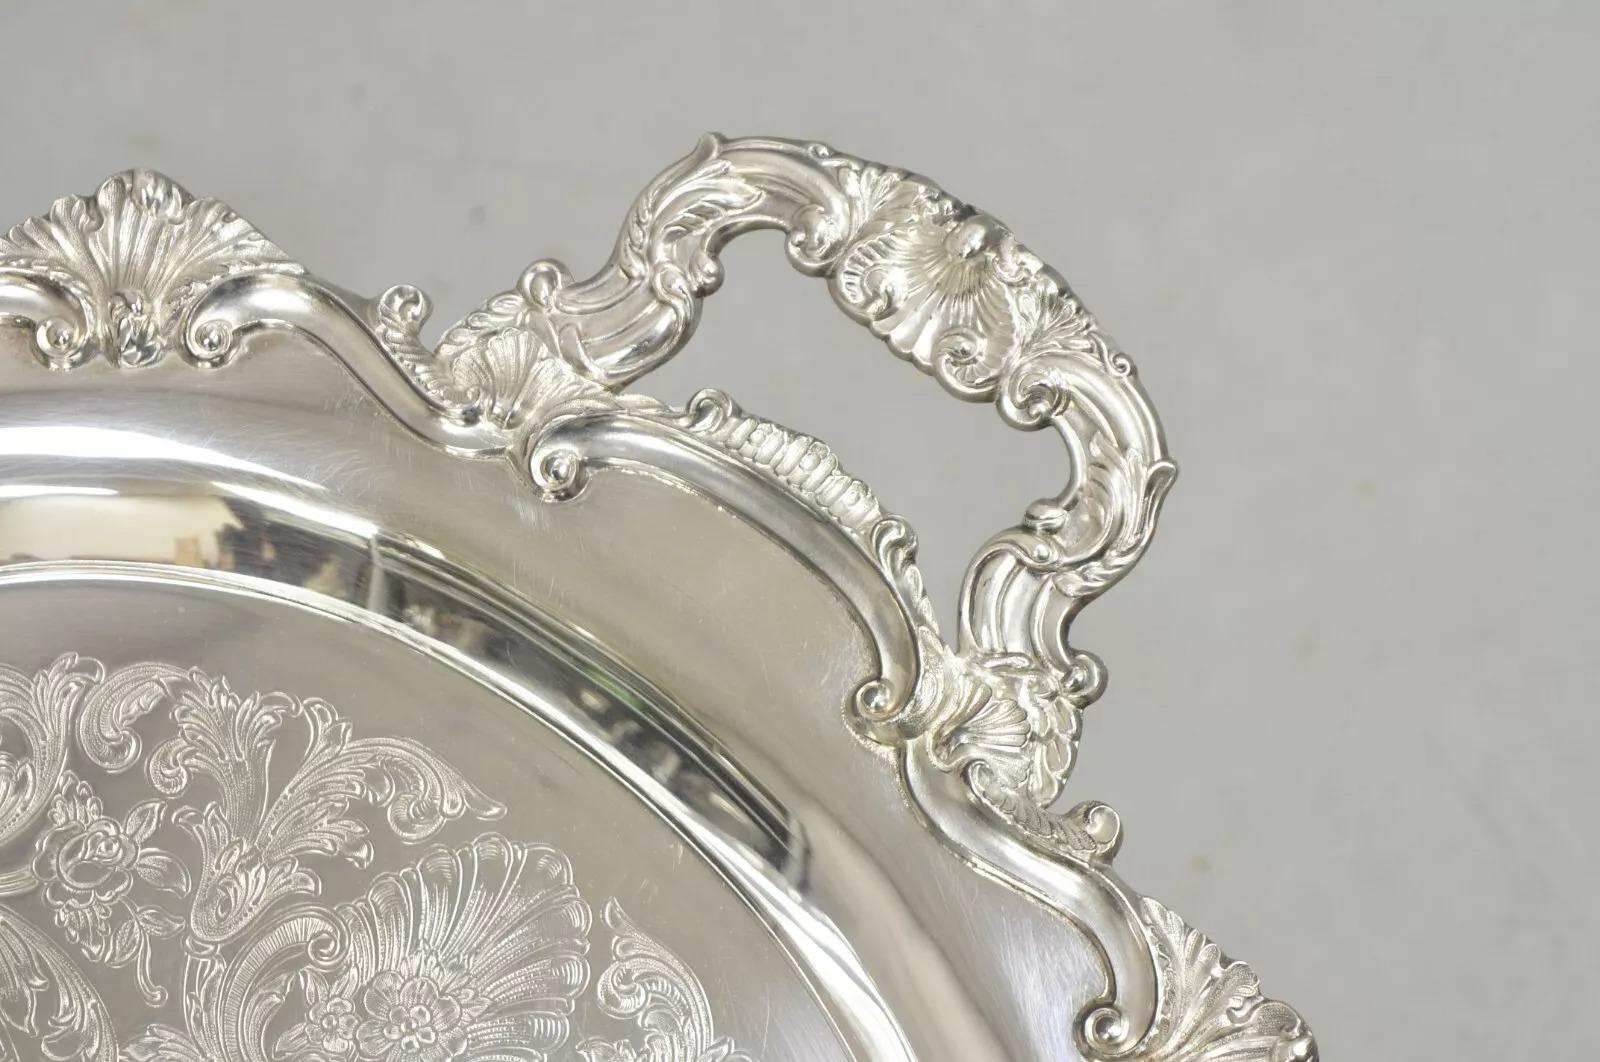 EPCA Bristol Silverplate by Poole 145 Silver Plated Victorian Style Serving Tray In Good Condition For Sale In Philadelphia, PA